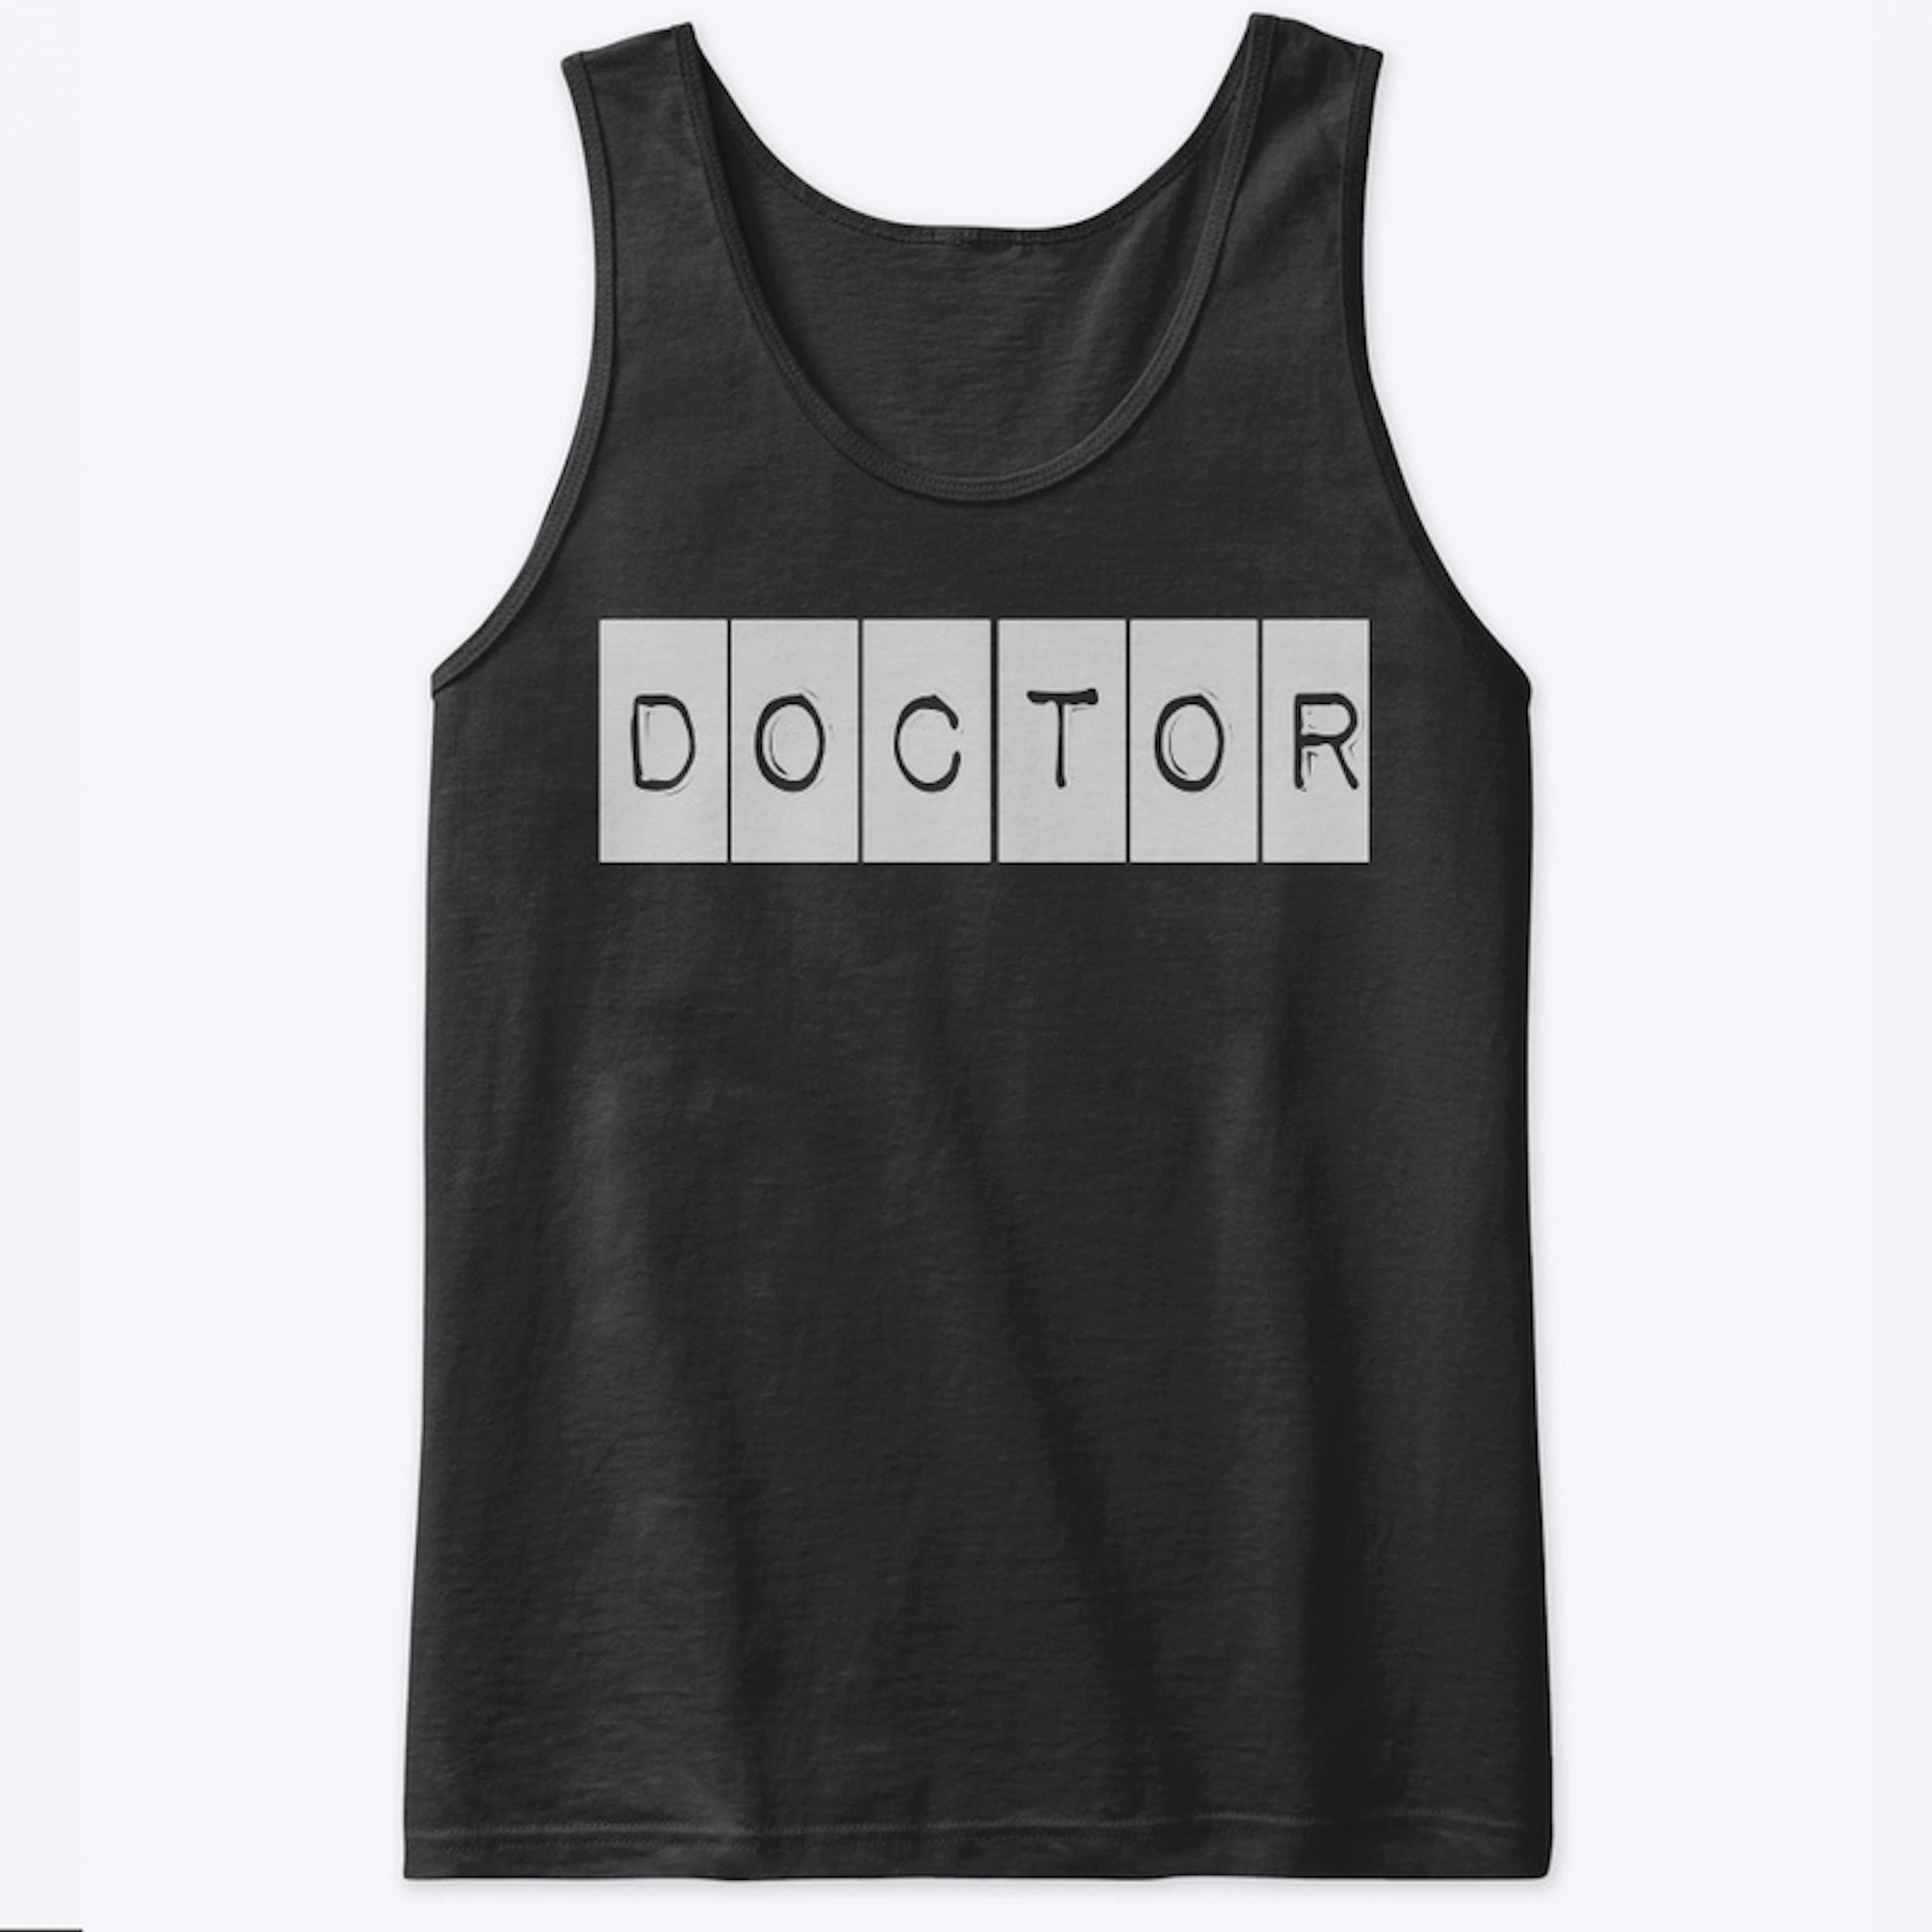 DOCTOR 